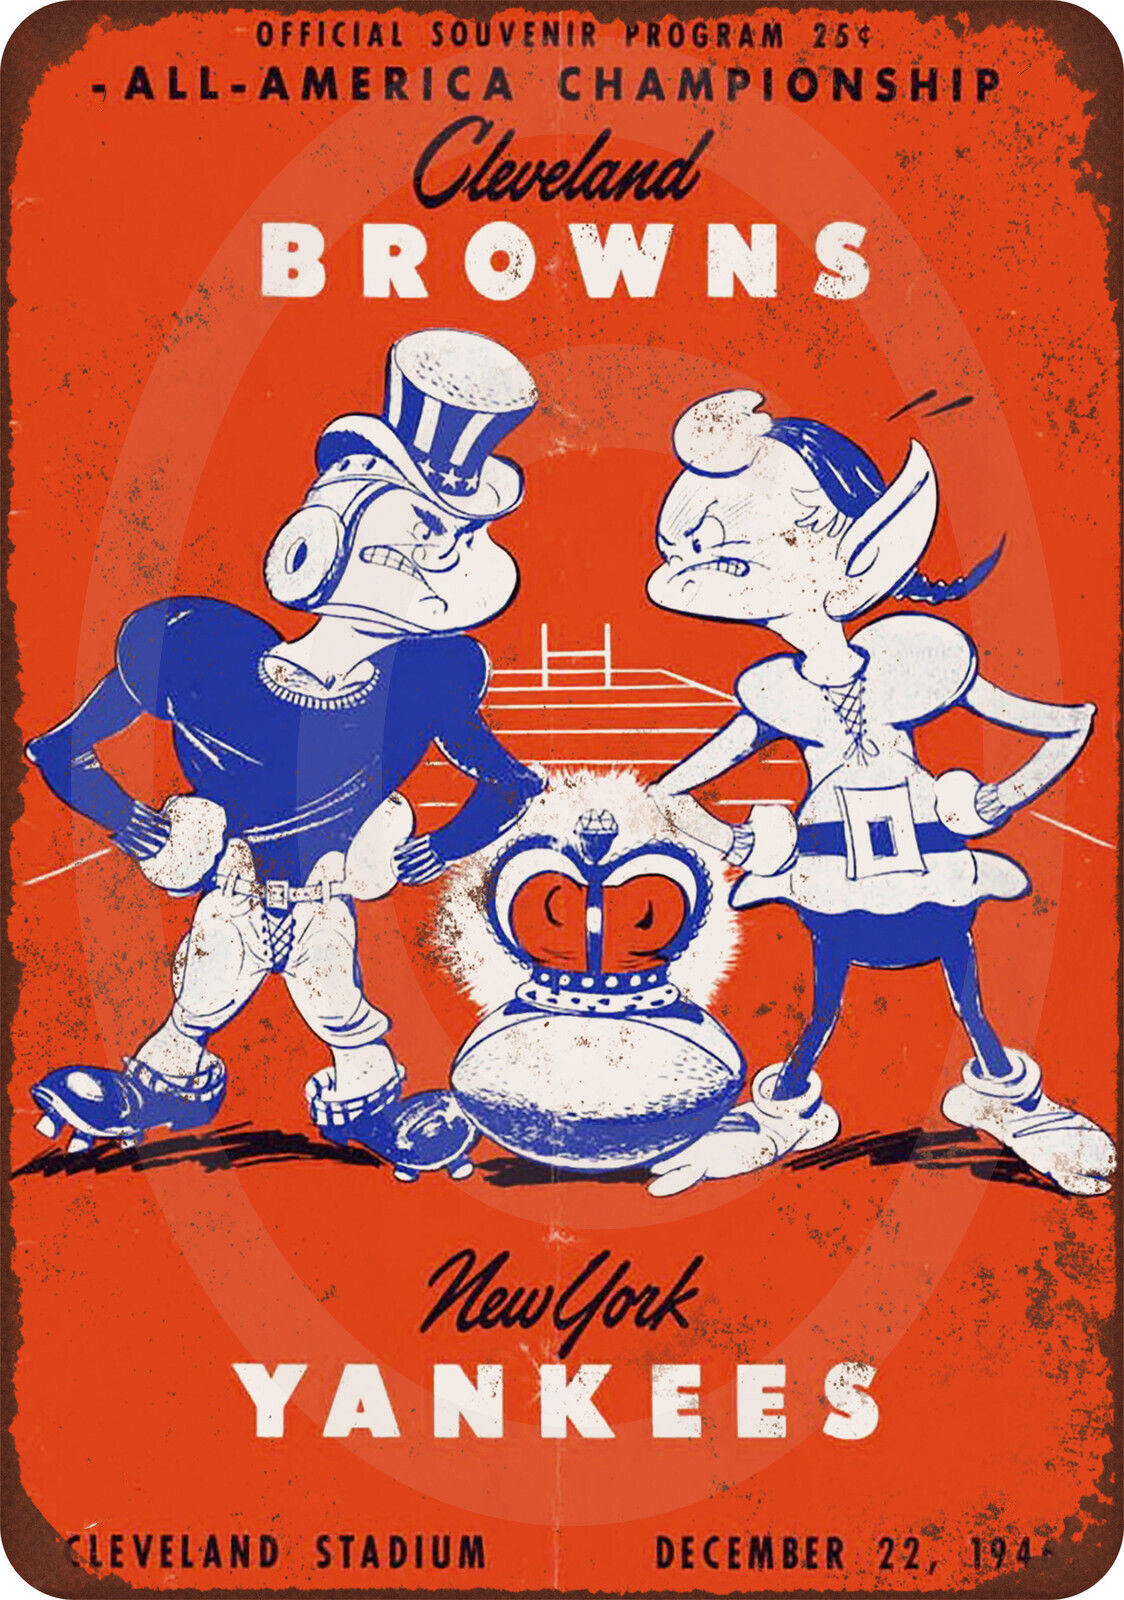 1946 Cleveland Browns VS new york Yankees Reproduction METAL SIGN 8 x 12